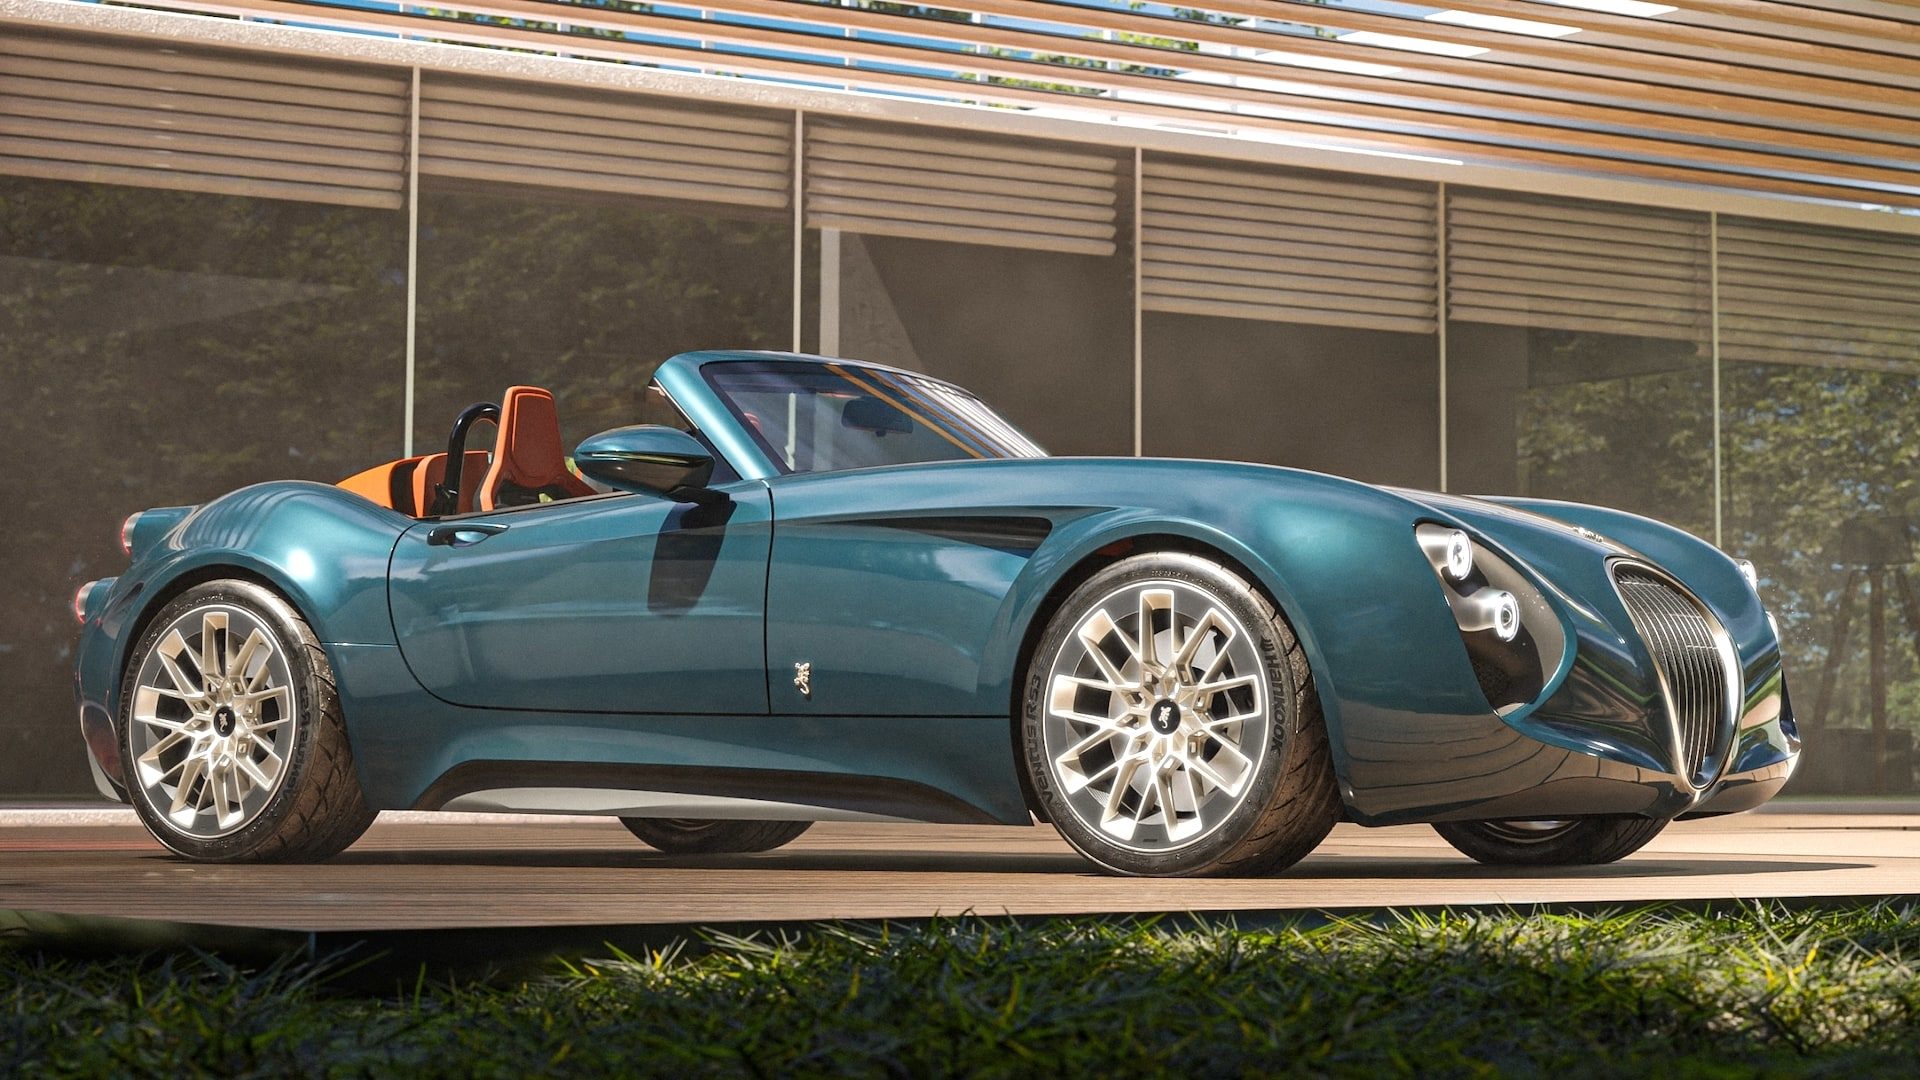 Wiesmann Project Thunderball Design Concepts